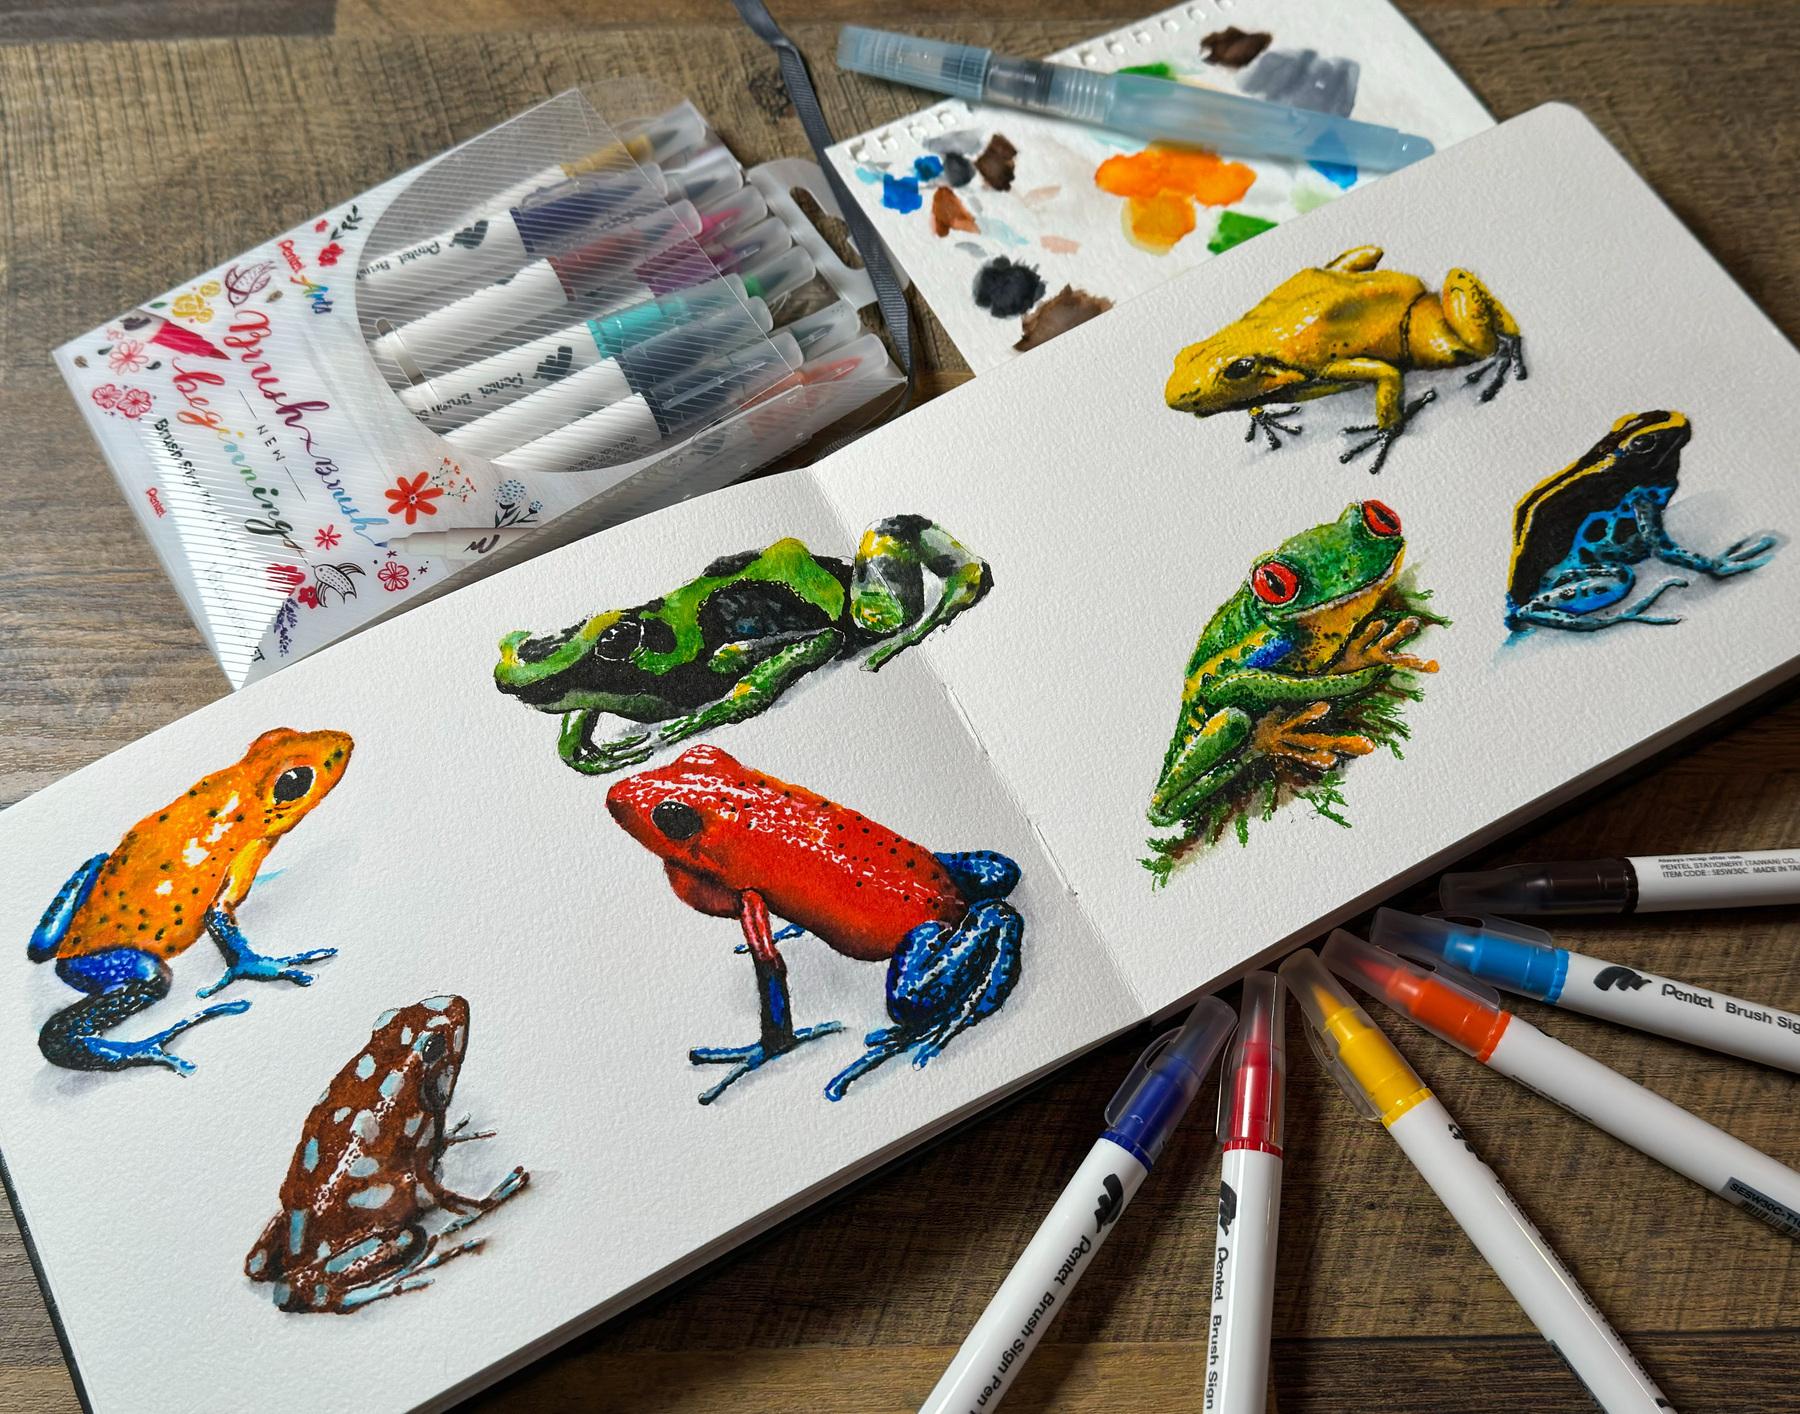 A collection of marker drawings of various colorful frogs on a textured white canvas, surrounded by markers and water brushes, with a piece of paper showing paint smudges and mixing areas in the background, all laid out on a wooden surface.